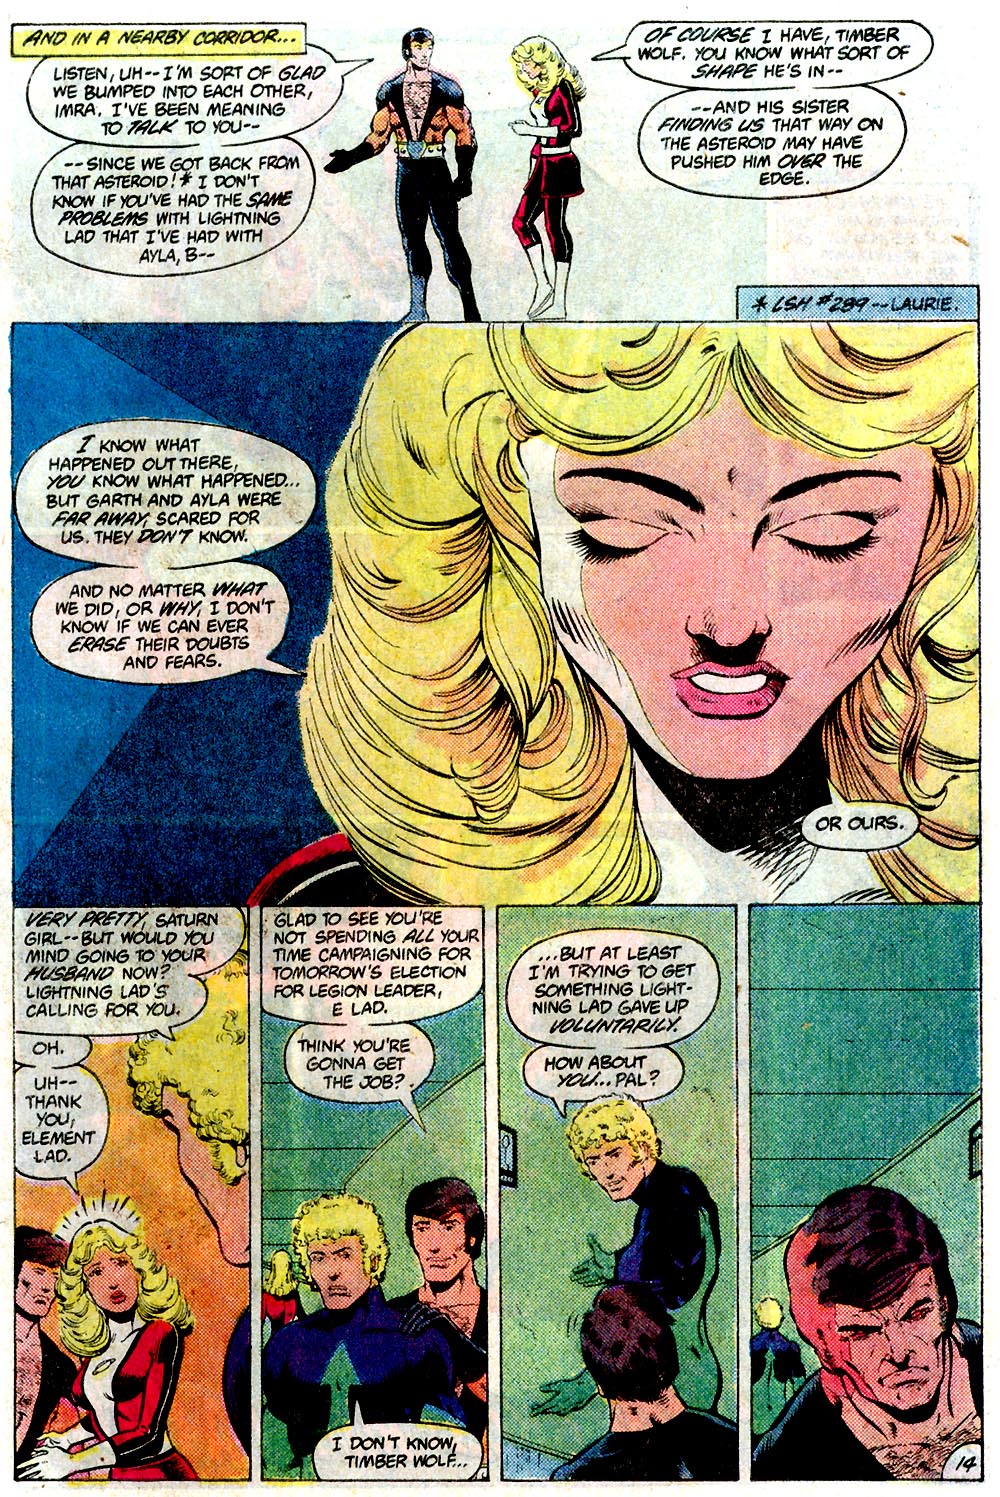 Legion of Super-Heroes (1980) 290 Page 14